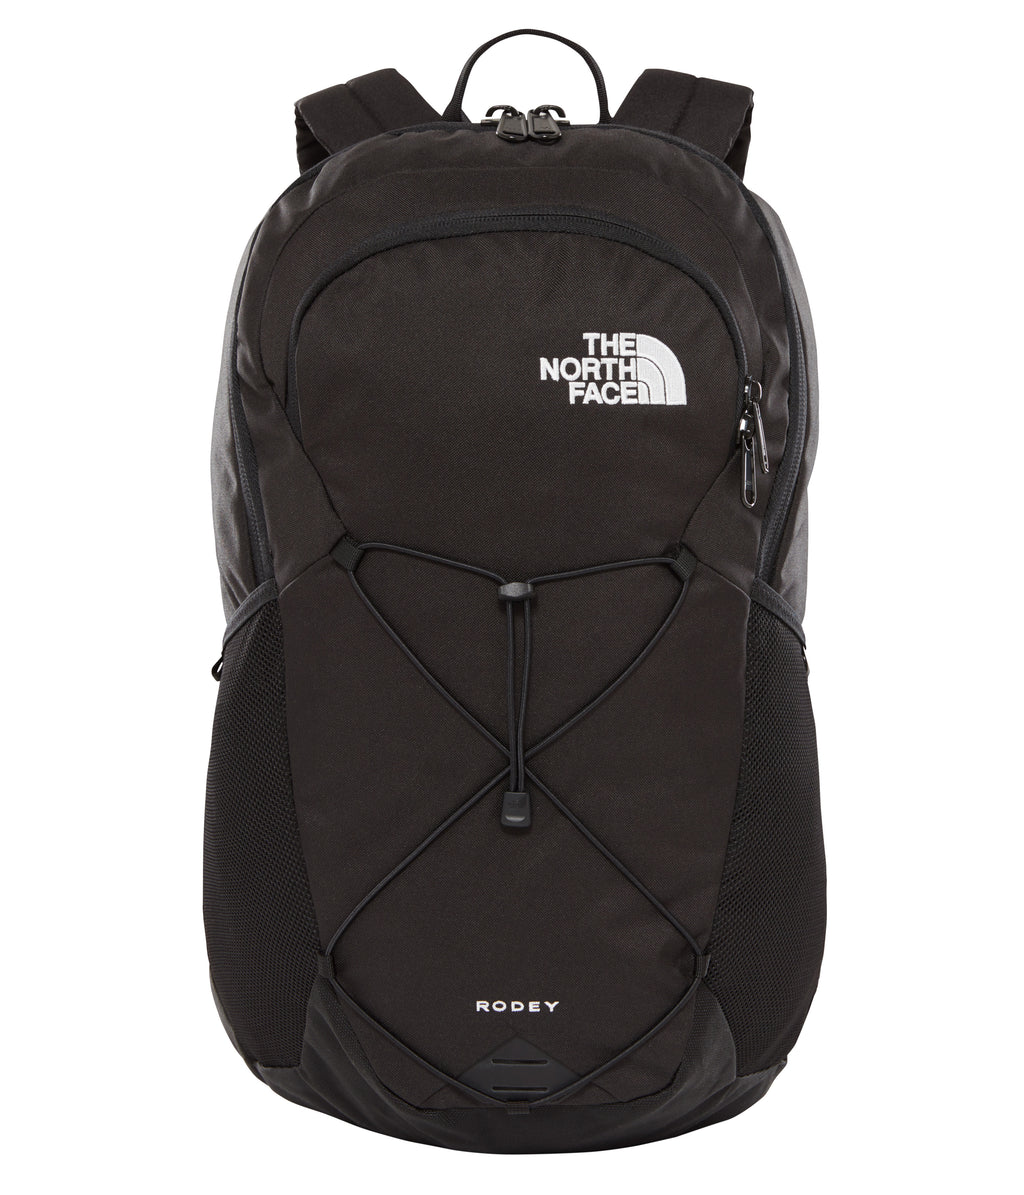 The North Face Rodey 27L promotional Backpack